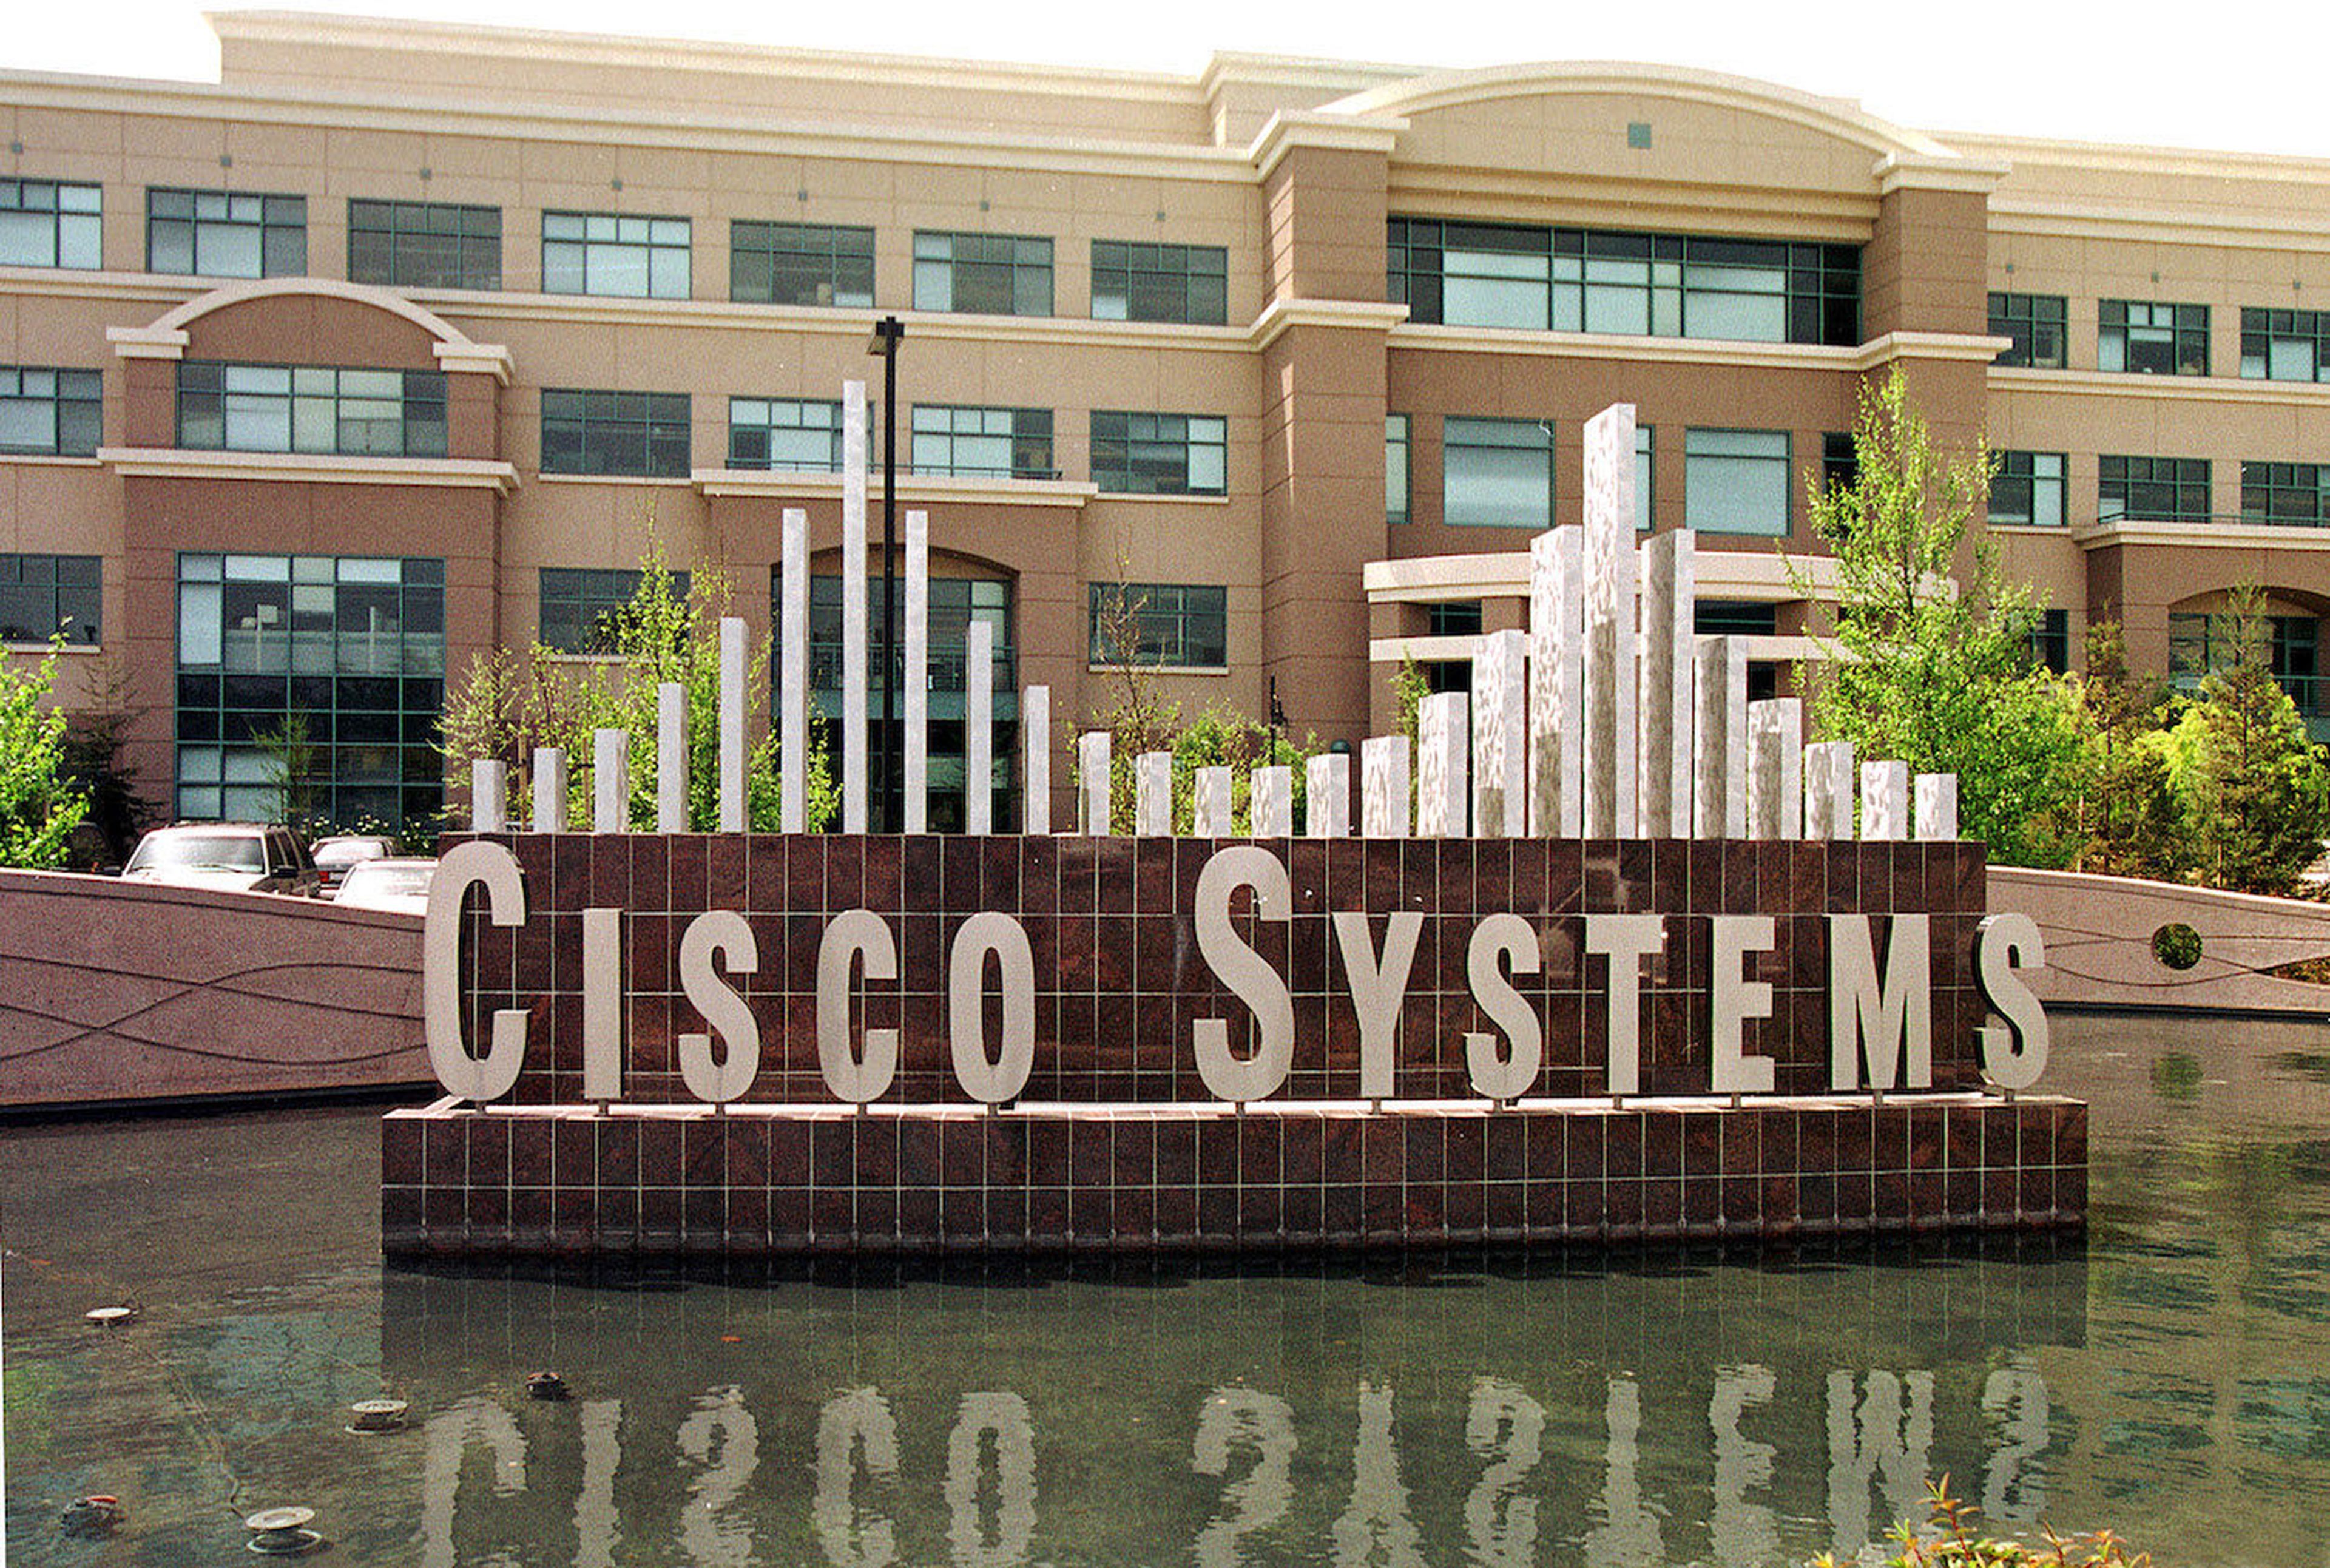 SAN JOSE, CA &#8211; APRIL 17, 2001:  (FILE PHOTO)  The facade of a building on Cisco Systems&#8217; sprawling complex  is shown April 17, 2001 in San Jose, California. Analysts expect Cisco Systems to post a 13 cents-per-share profit February 4, 2003 for the second quarter.  (Photo by Dan Krauss/Getty Images)